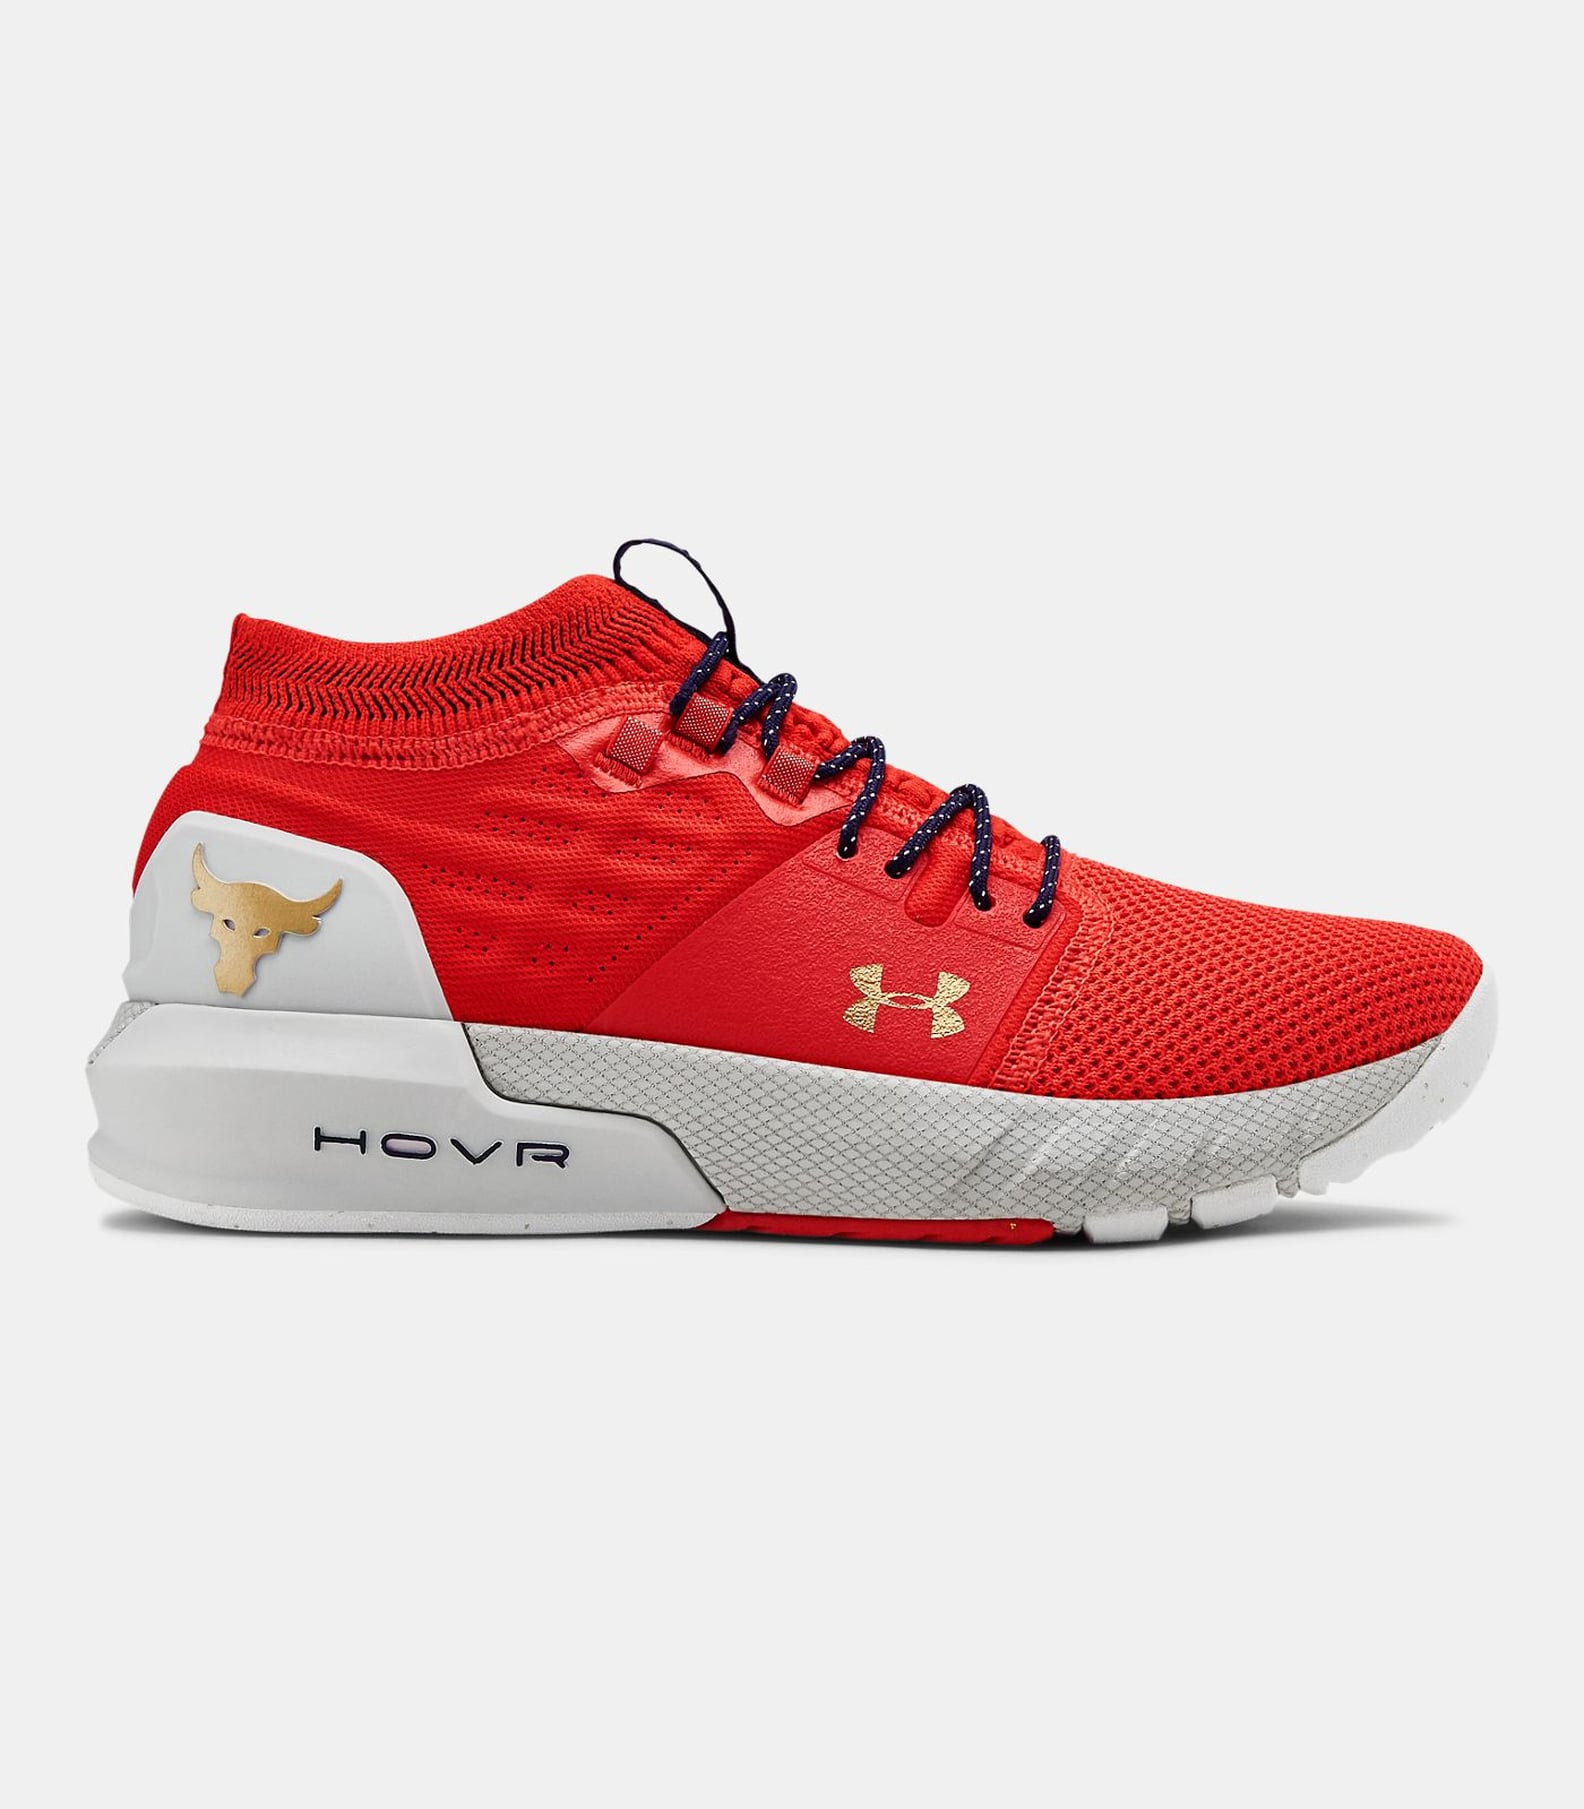 Colorful Training Shoes From Under Armour | POPSUGAR Fitness